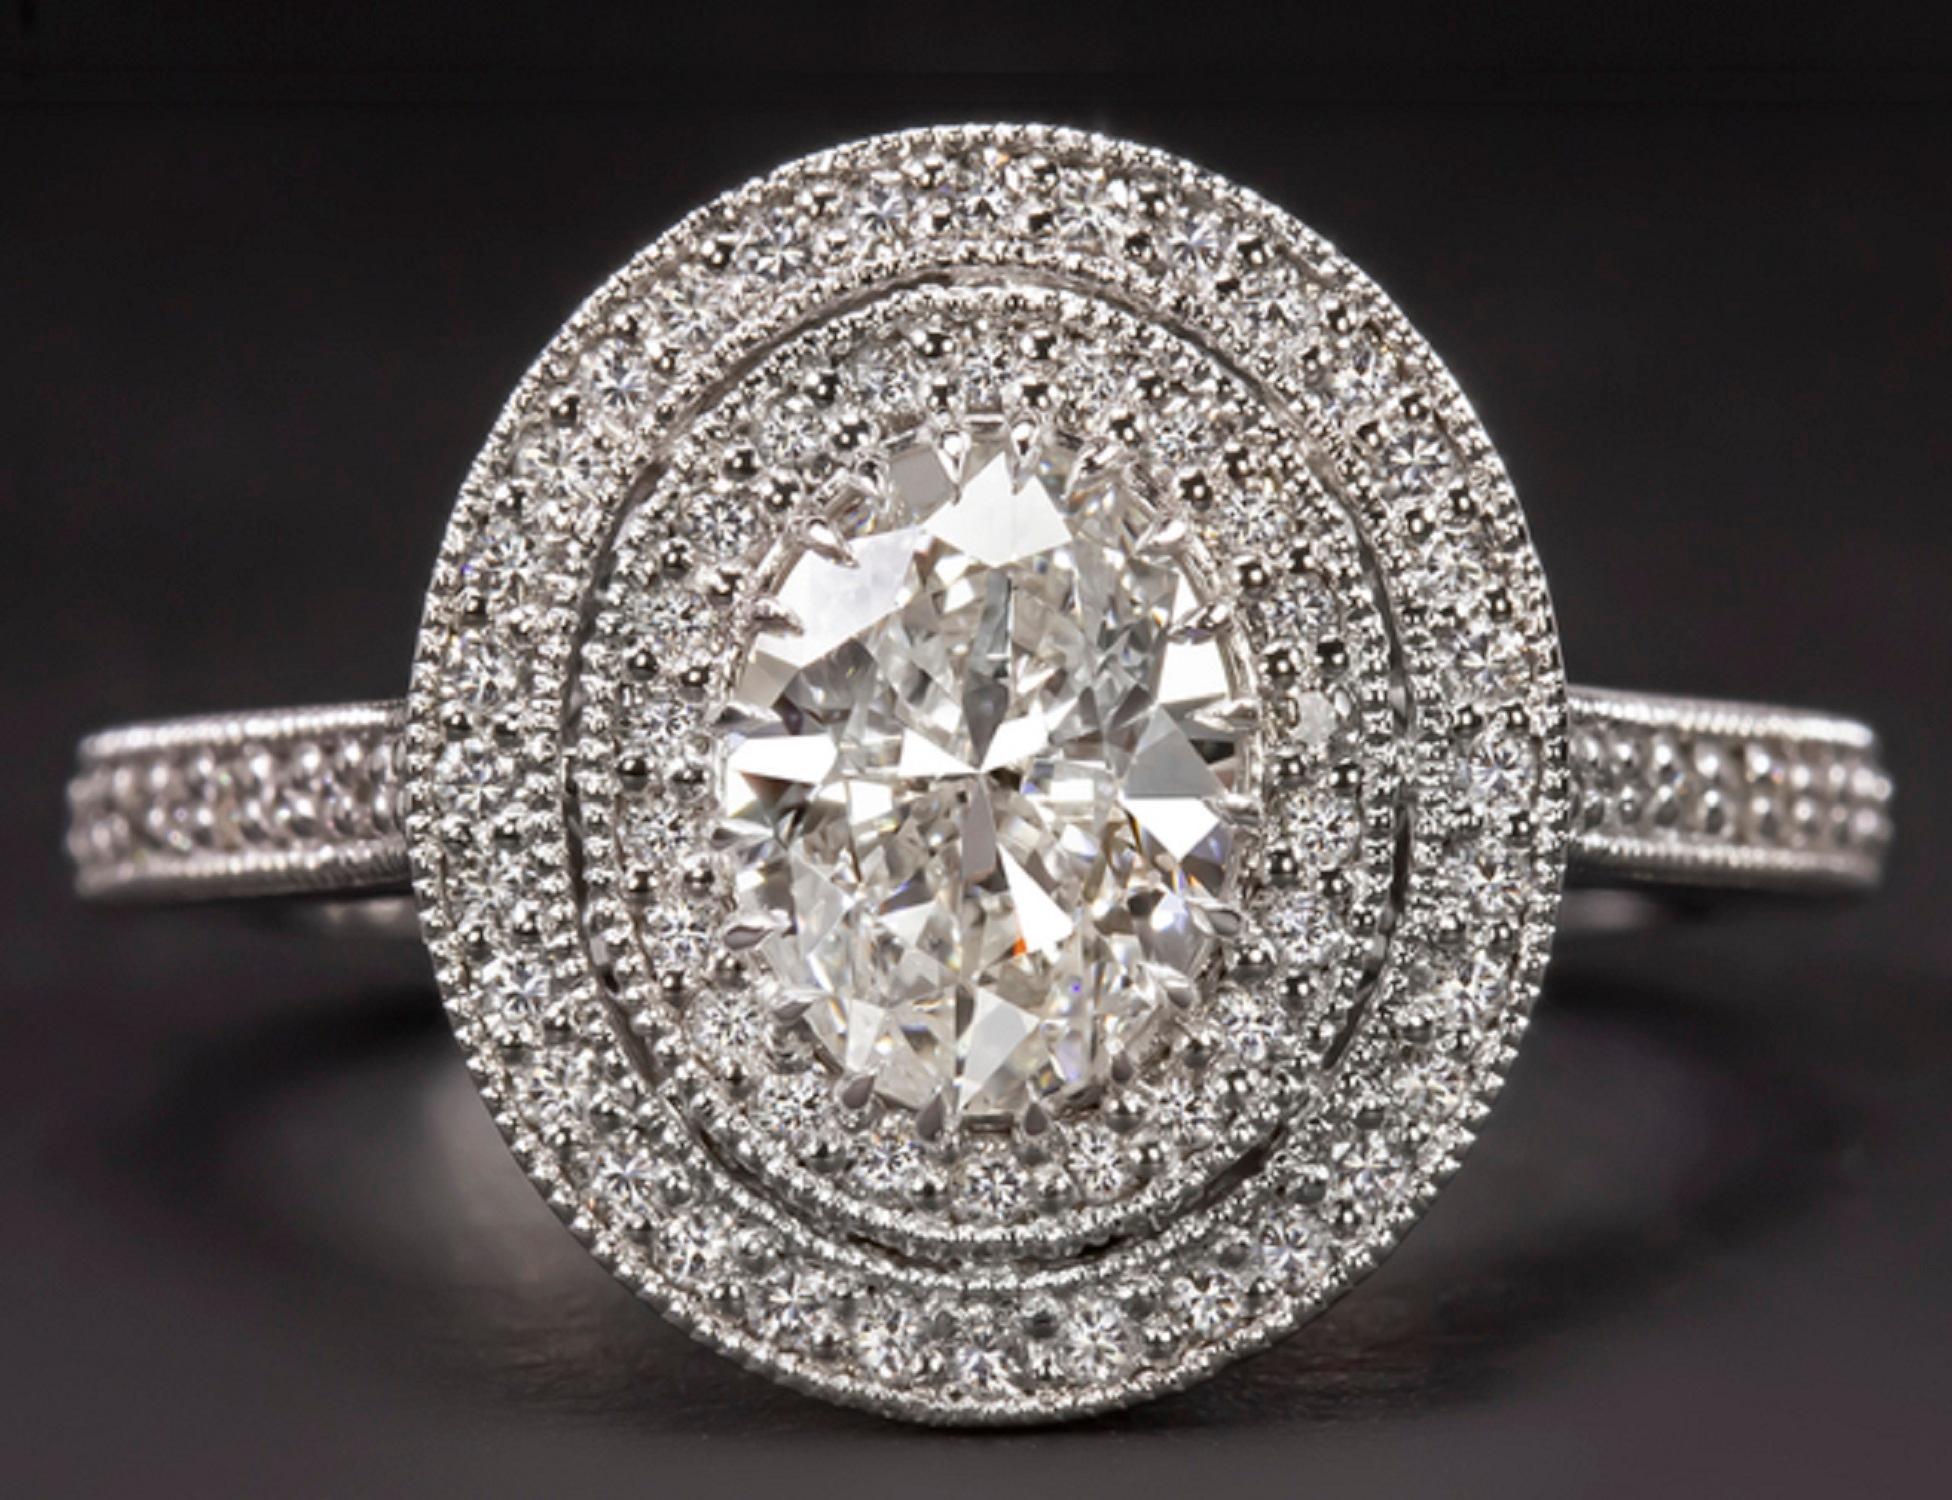 The main stone of this magnificent ring is a 1.00 carat GIA certified oval diamond; the main diamond is surrounded by a 0.30 carat double diamond halo.

The 1-carat central diamond is certified by GIA, it is a grade H in color and SI1 in clarity;